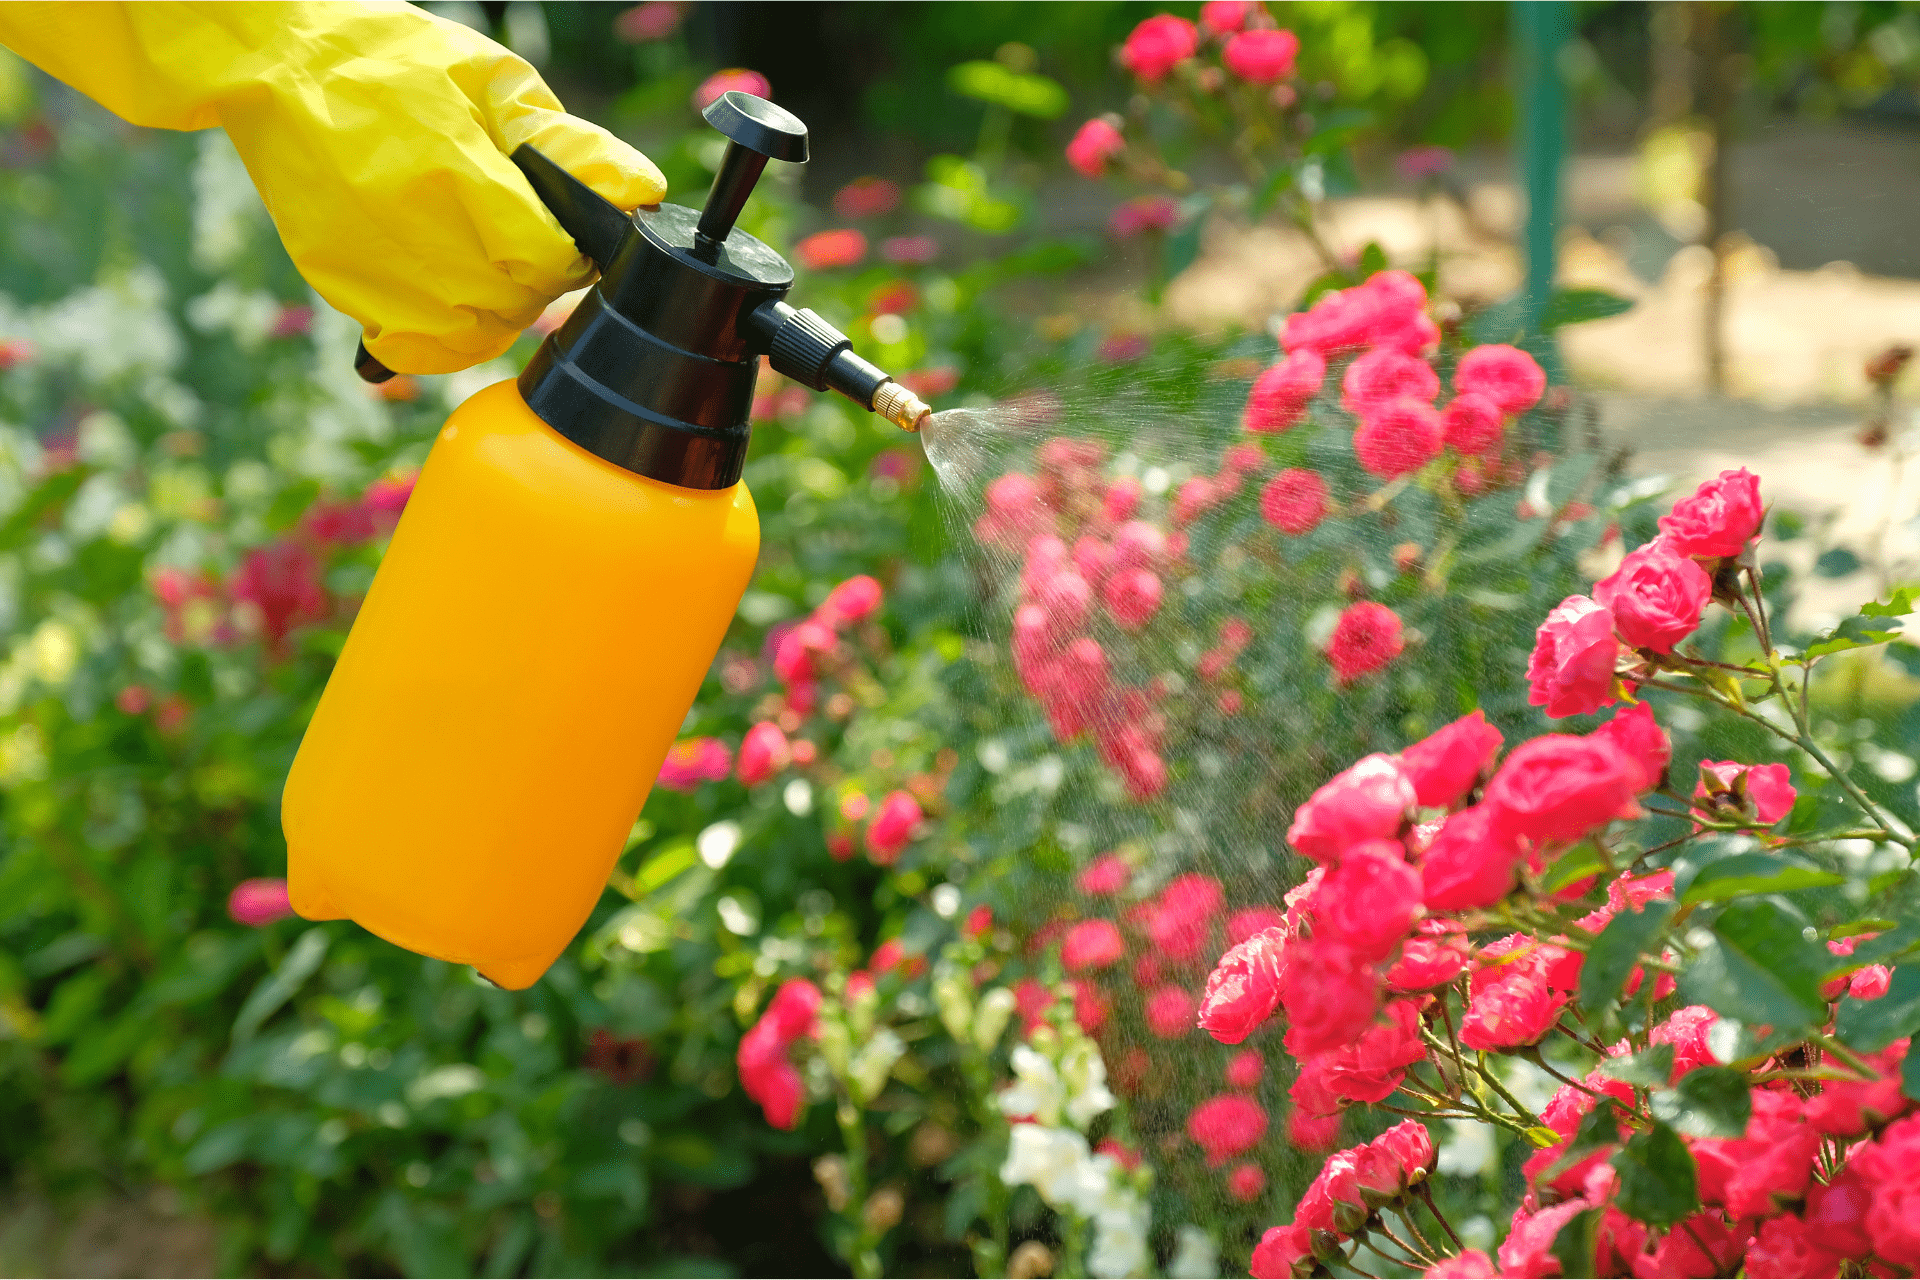 A landscaper from Boise Landscaping Company spraying pesticides onto flowers in a garden, using a garden spray bottle